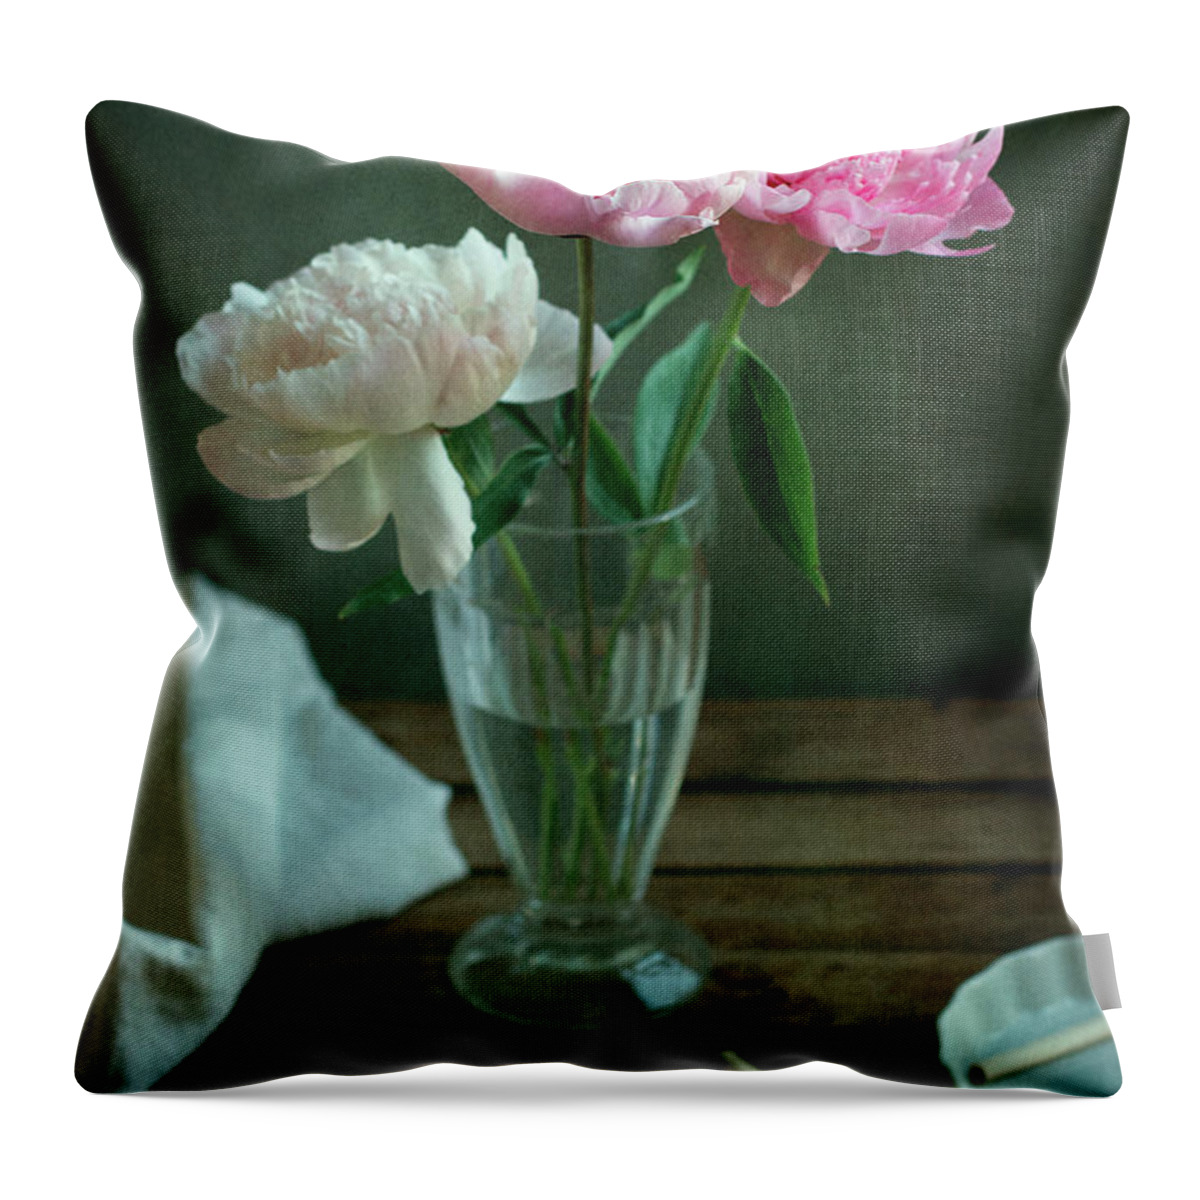 Vase Throw Pillow featuring the photograph Peony Flowers In Glass Vase by Copyright Anna Nemoy(xaomena)